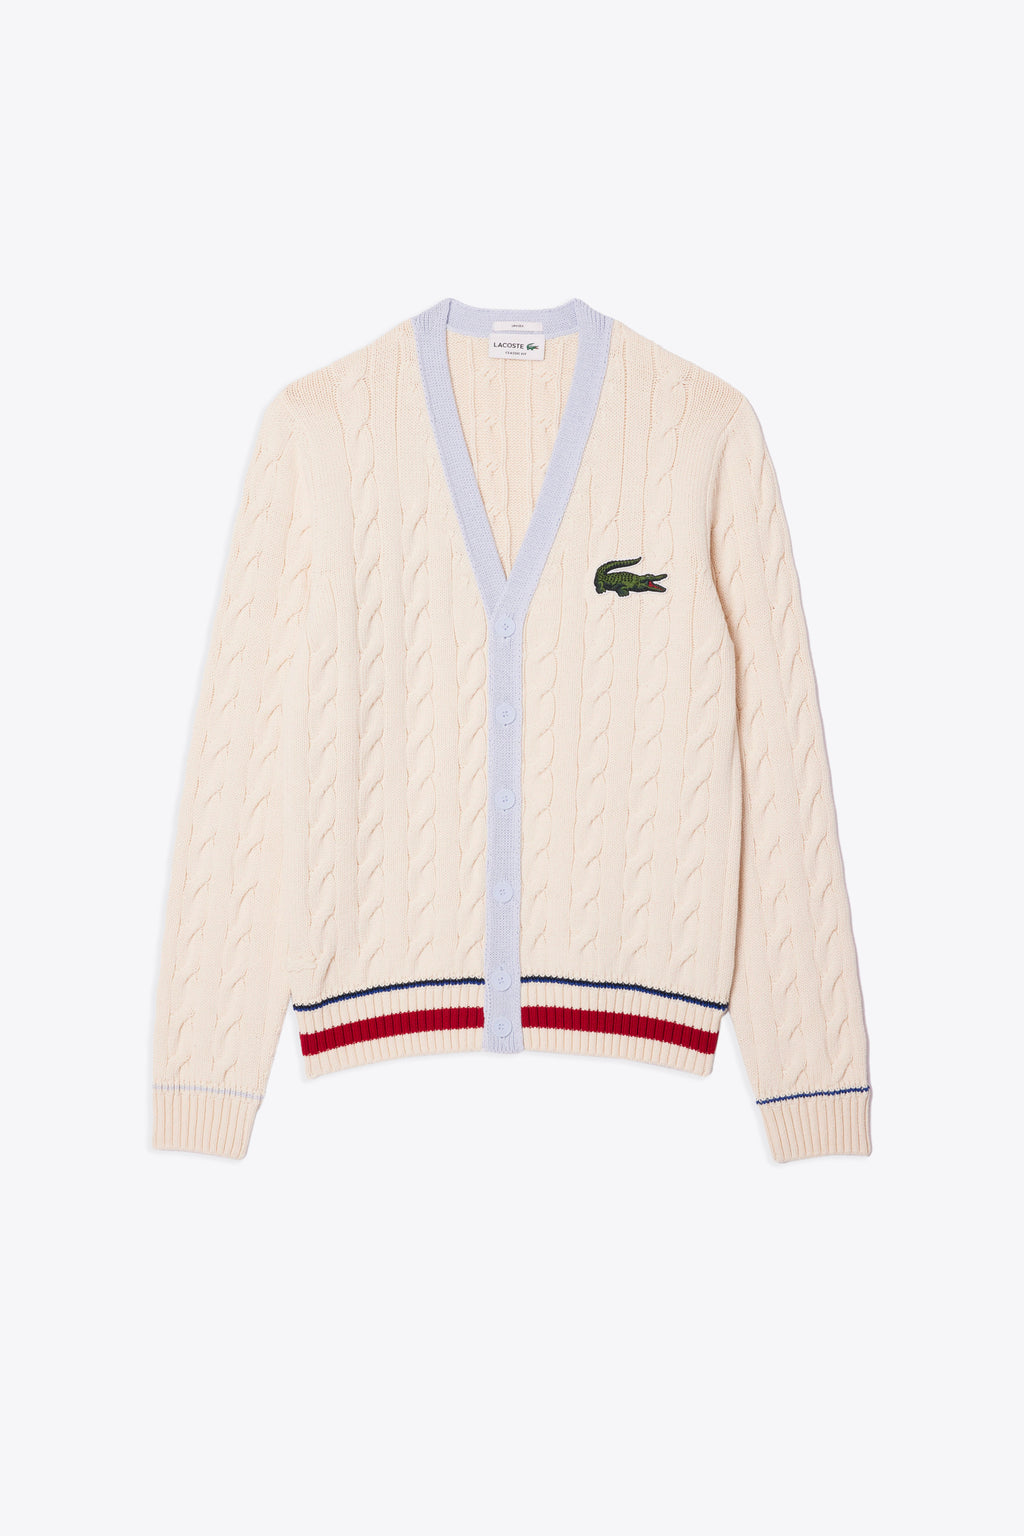 alt-image__Off-white-cable-knit-cardigan-with-logo